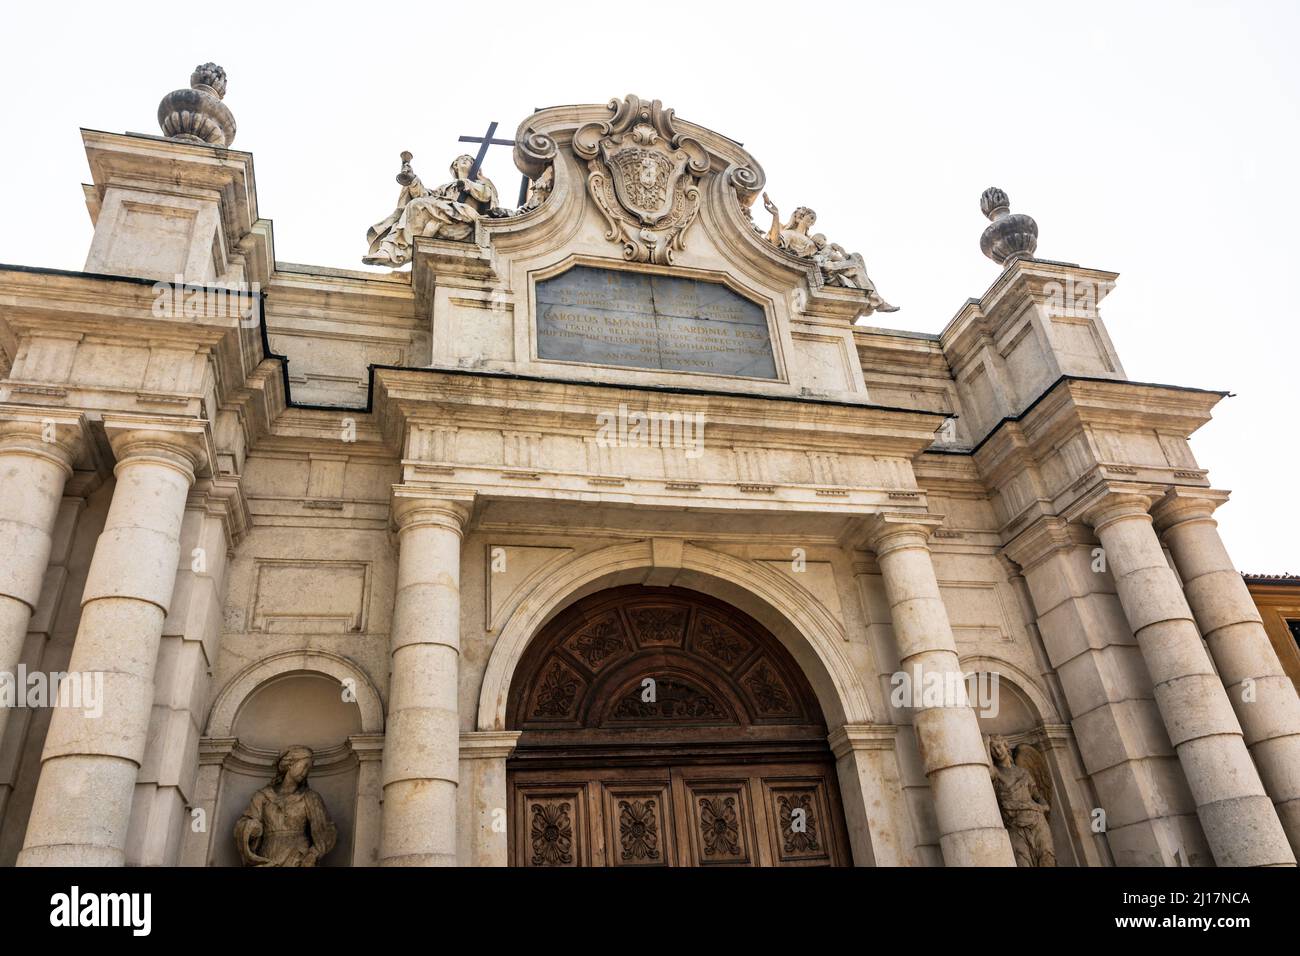 Collegno,Italy,Europe - July 21, 2019 : Detail of the entrance door of Certosa Reale in Collegno Stock Photo